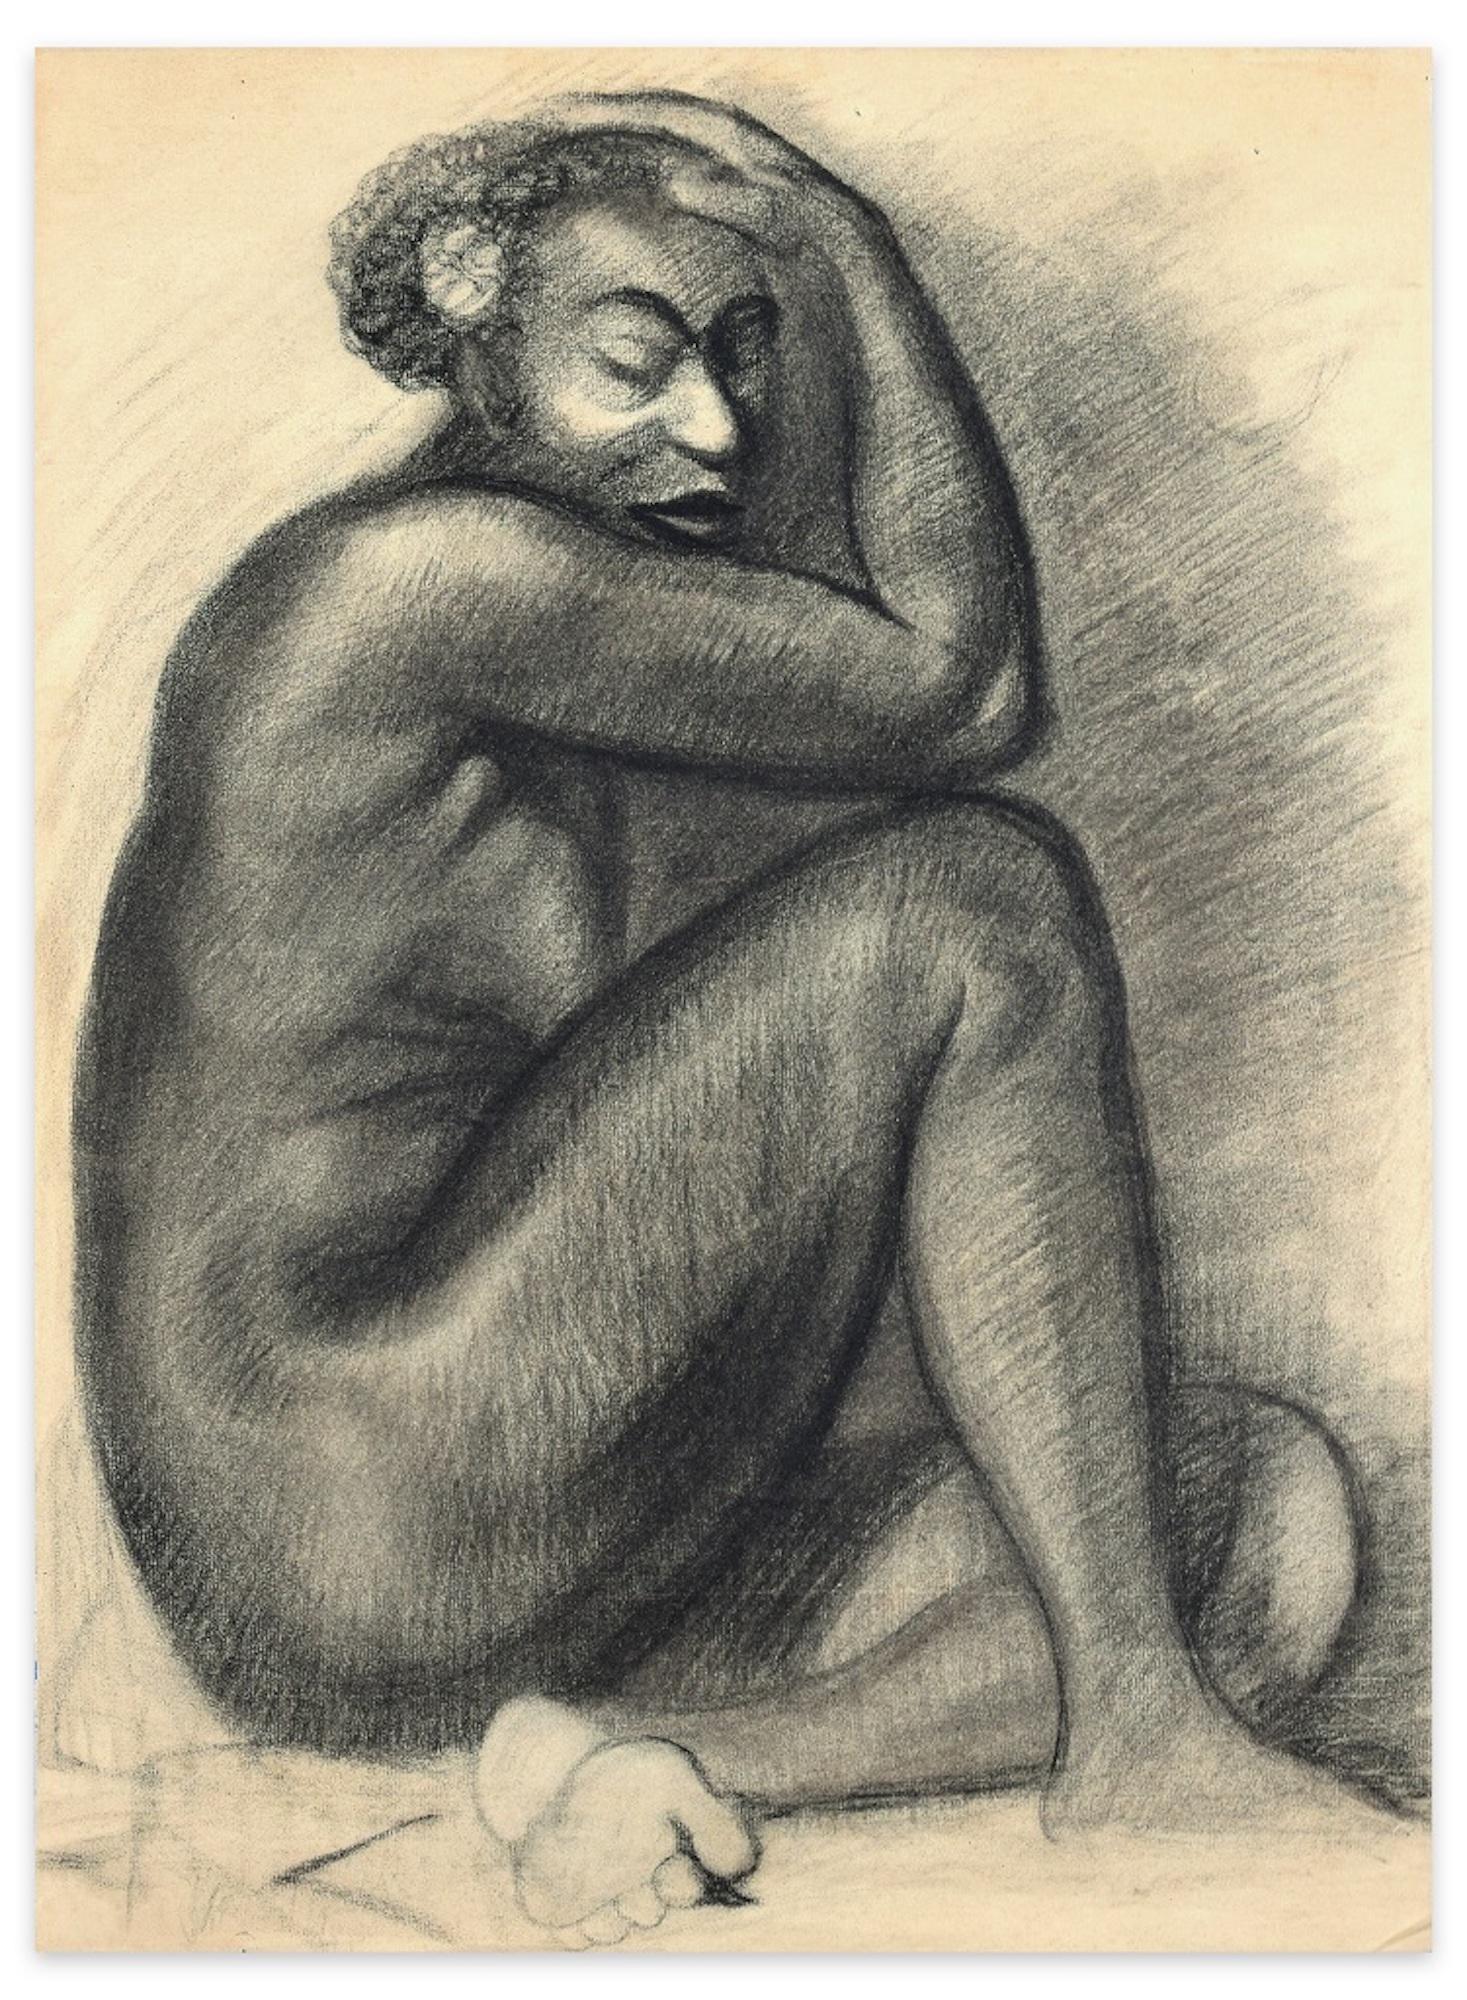 Unknown Nude - Studies for Portraits - Charcoal Drawings on Ivory Paper - 20th Century